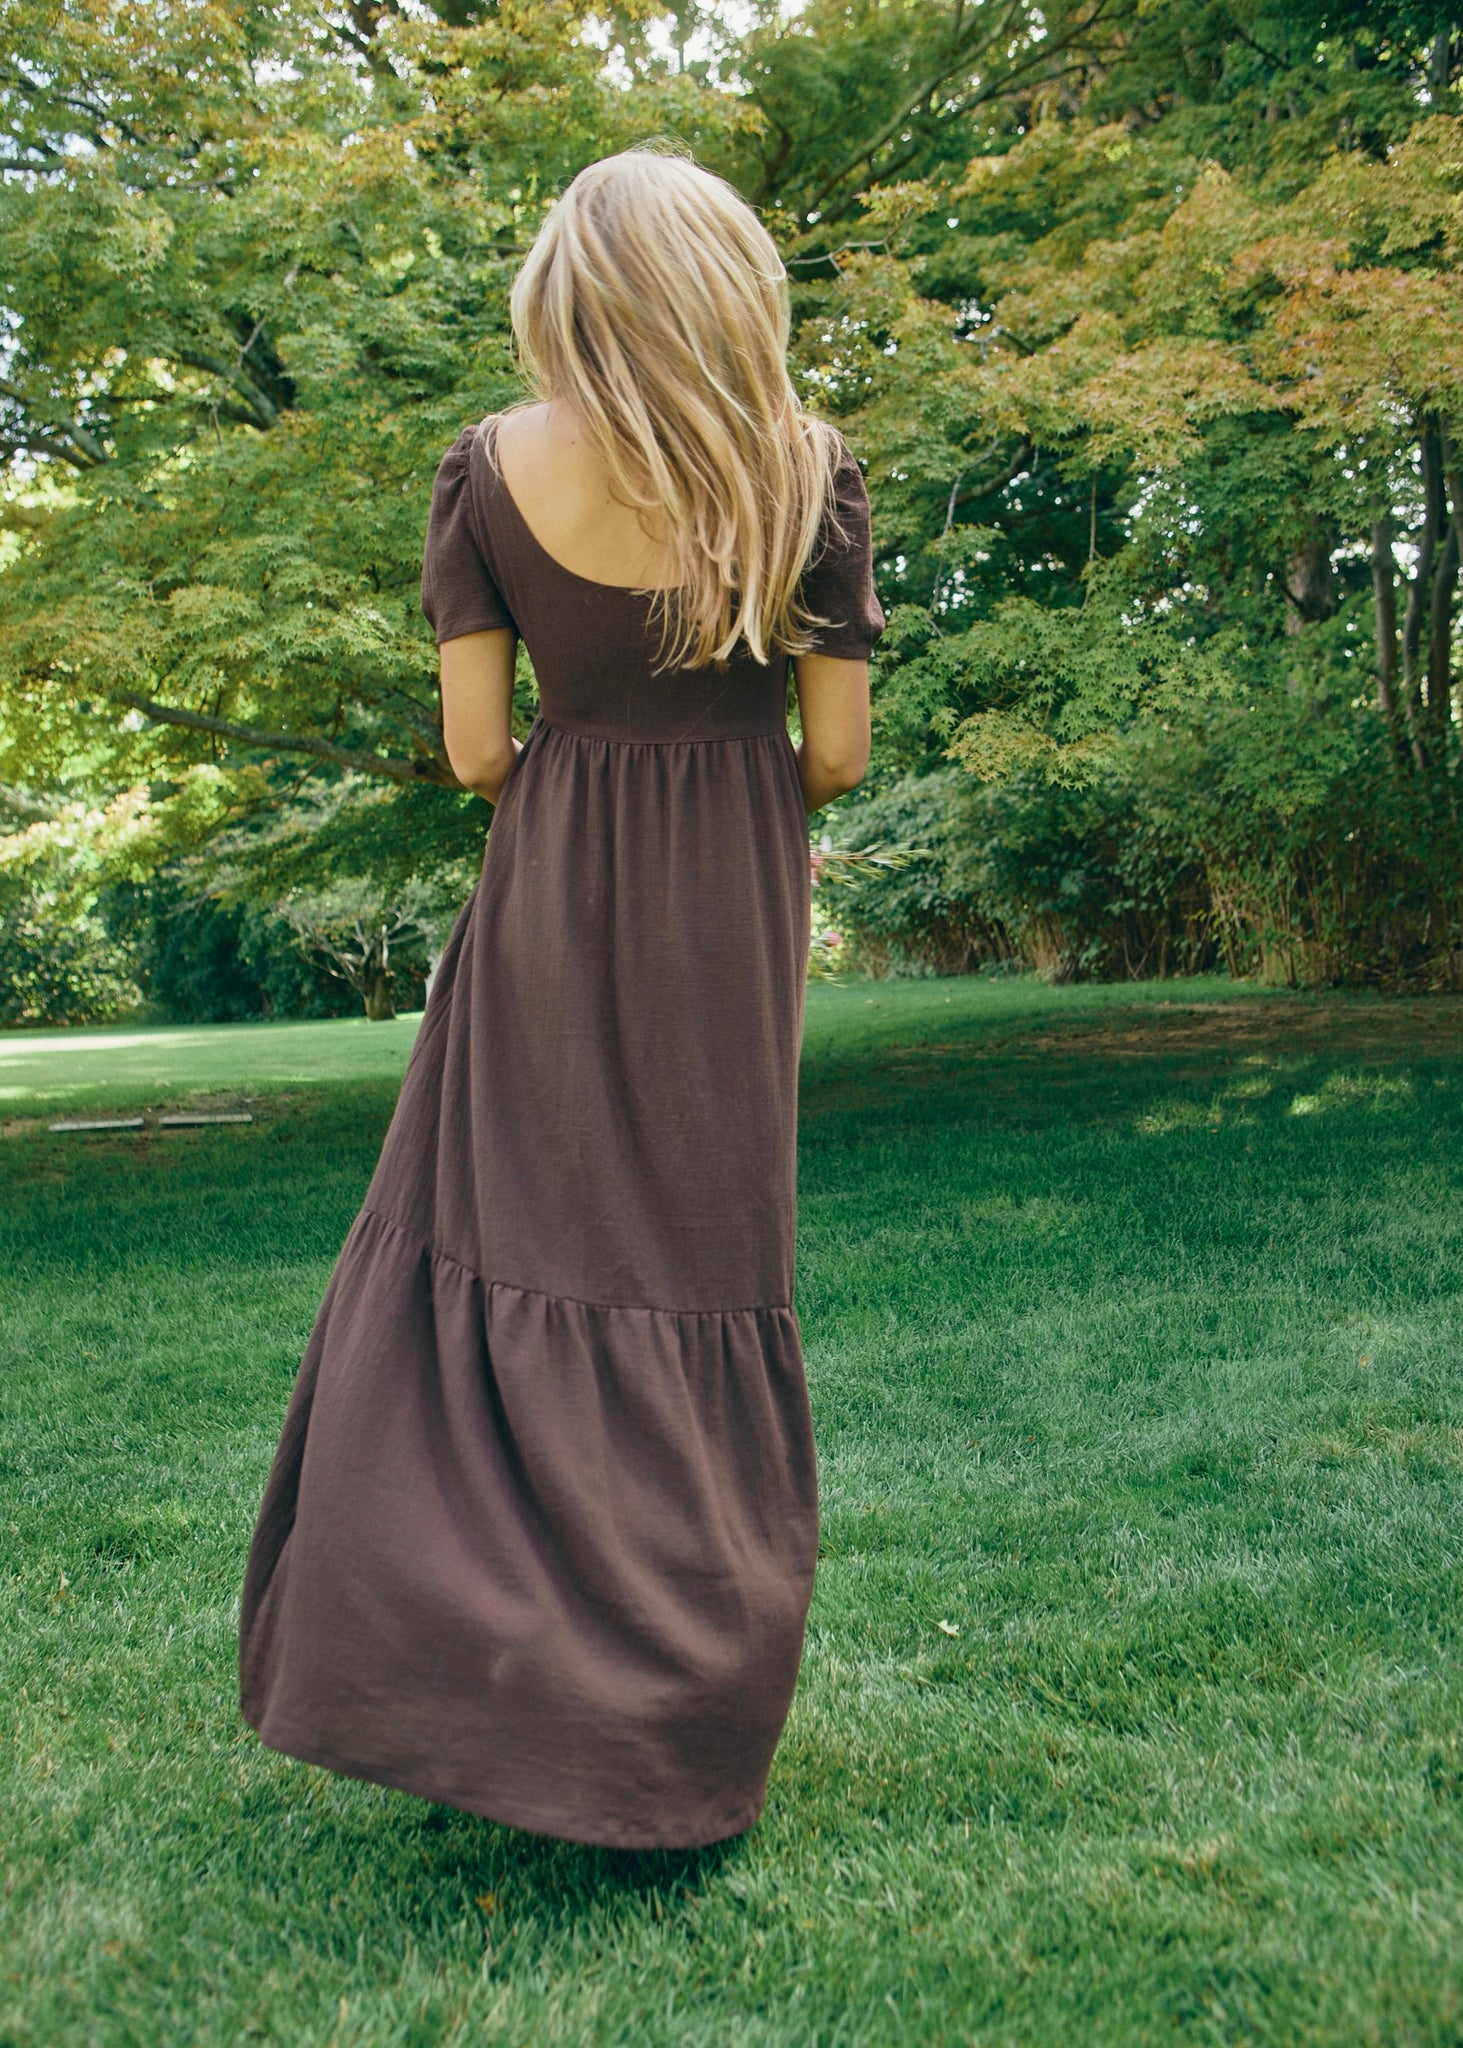 The Ines Dress in Chocolate